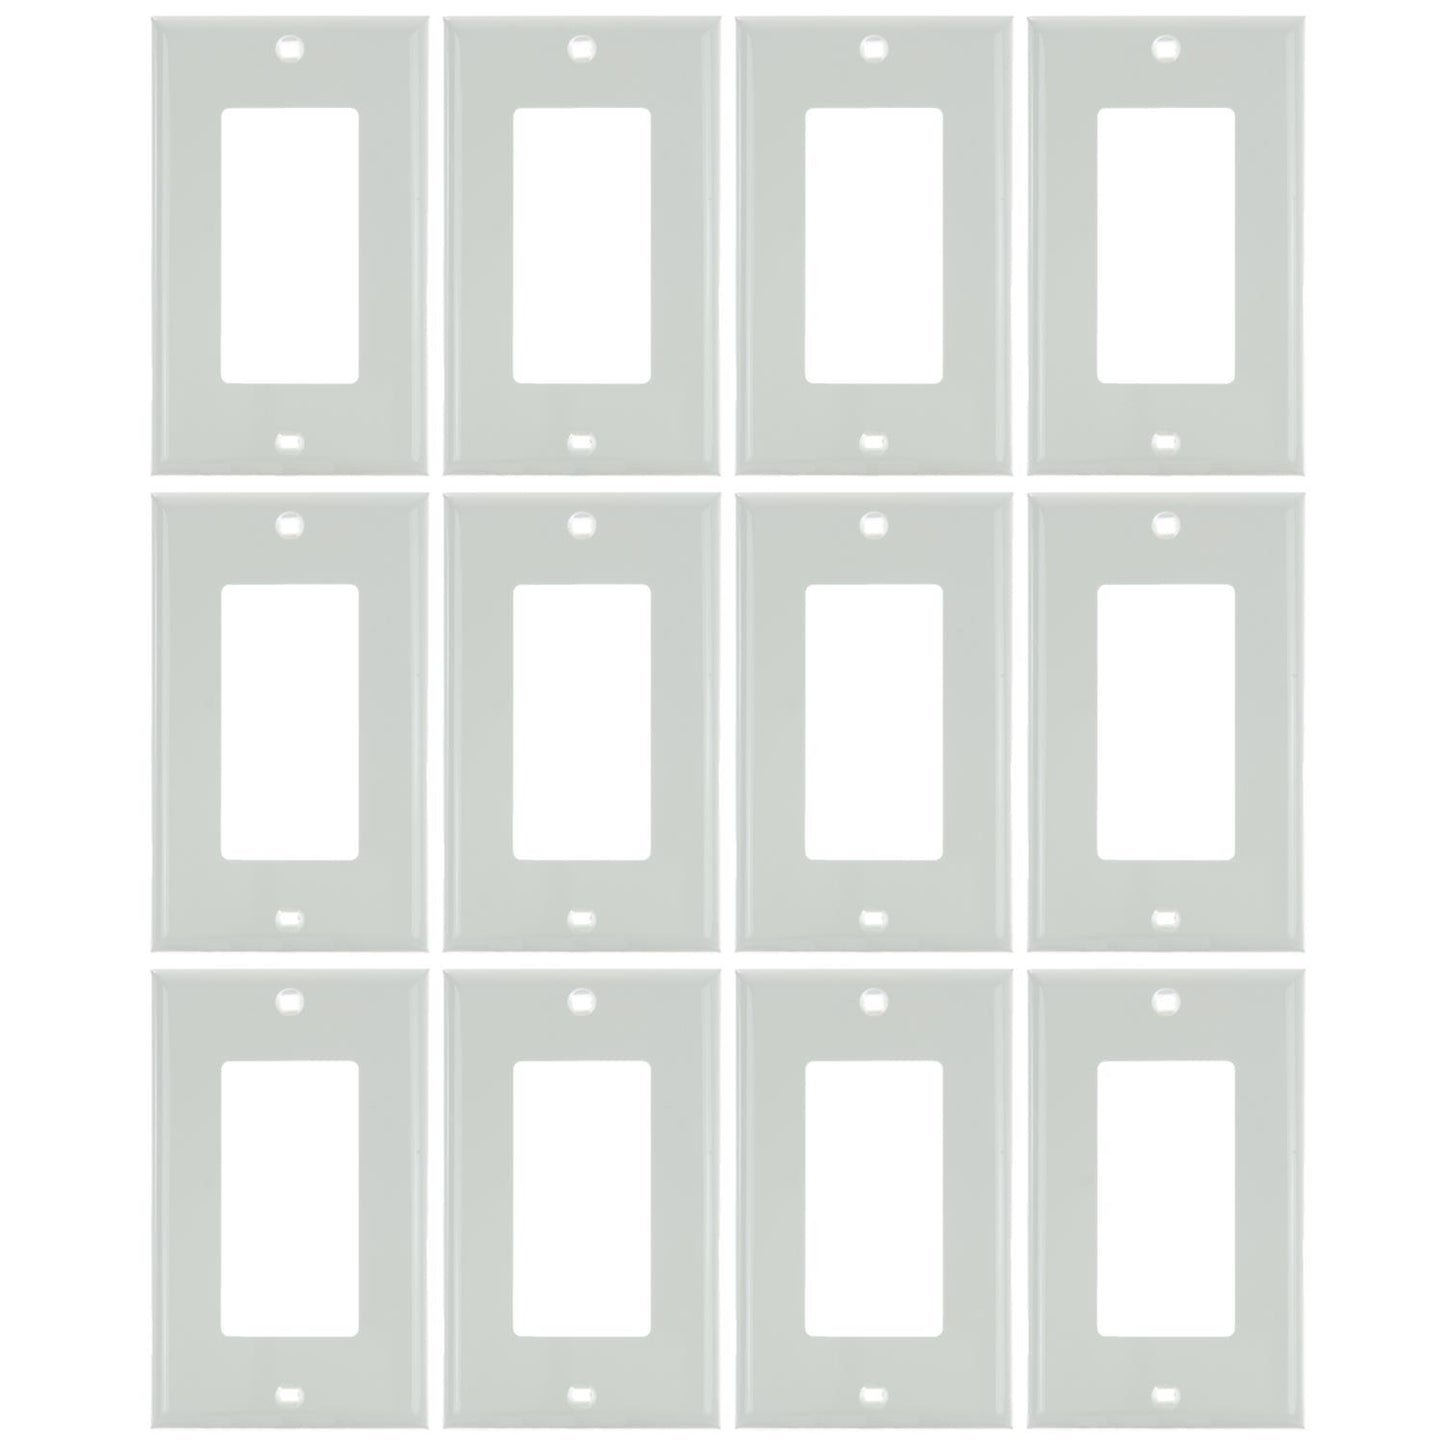 Sunlite E301/W 1 Gang Decorative Switch and Receptacle Plate, White